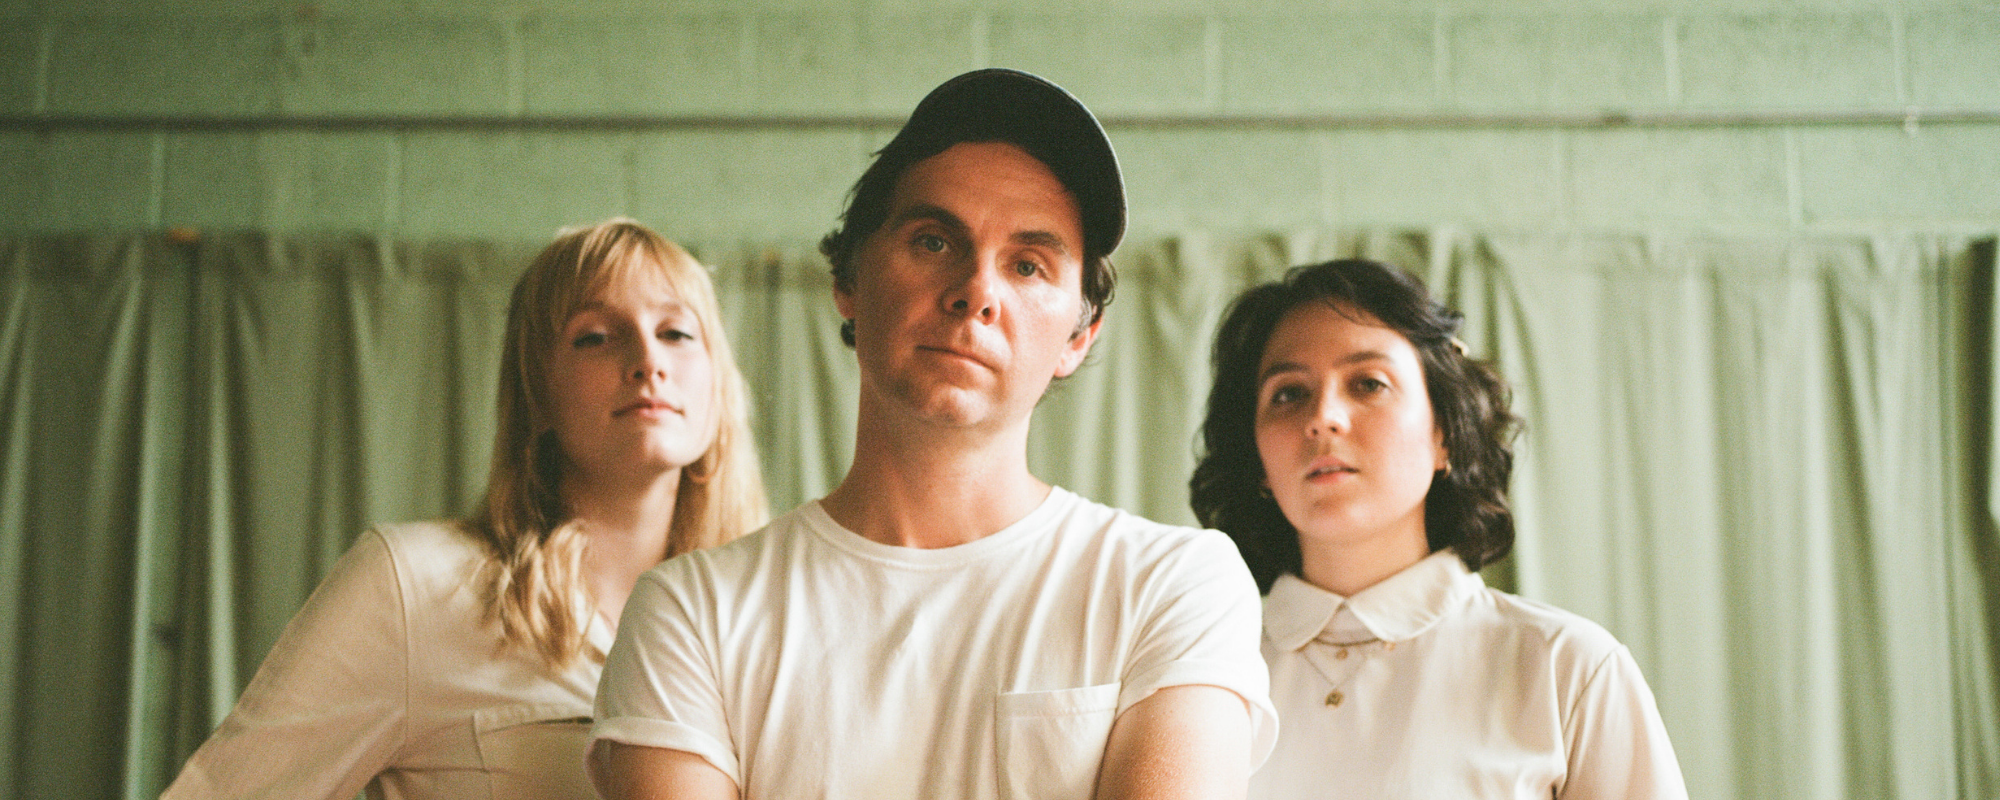 Daily Discovery: Bill and the Belles Keep Their Chins Up on “Taking Back My Yesterday”